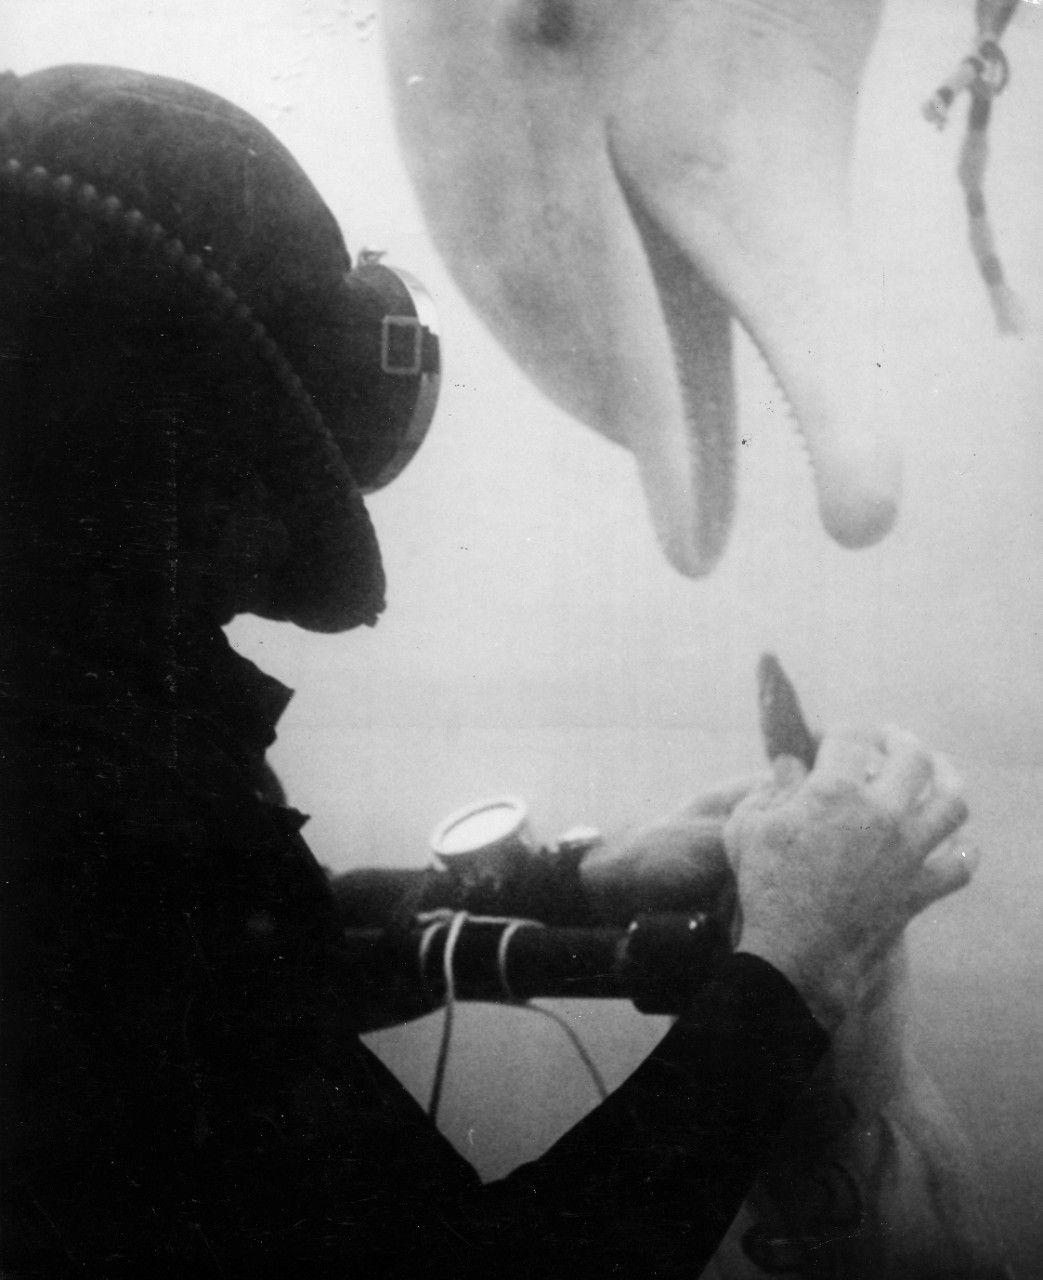 Navy diver John Reaves of SEALAB II Project, rewards porpoise Tuffy with a fish as they train together 80 feet down in the open ocean off Point Mugu, CA. Tuffy will work with Reaves and other divers in experiments to see how a porpoise can assist man underwater. A snap hook is attached to Tuffy's harness which enables him to carry messages and tools to the divers. The experiments with Tuffy during SEALAB II is a project of the US Naval Missile Test Center, Point Mugu, CA. 